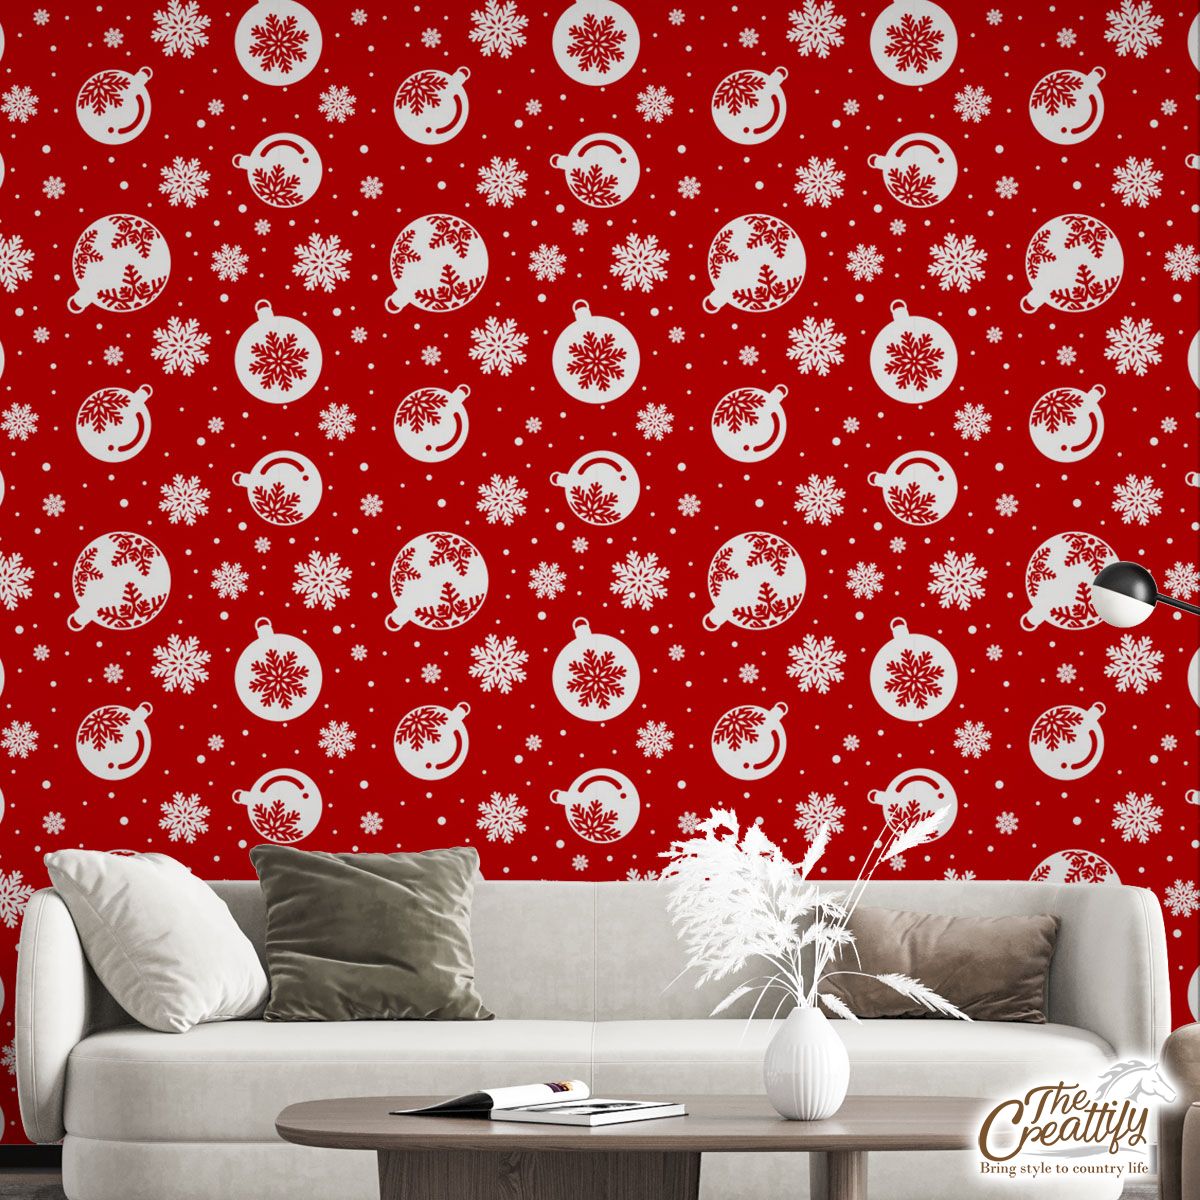 Red And White Christmas Balls On The Snowflake Background Wall Mural